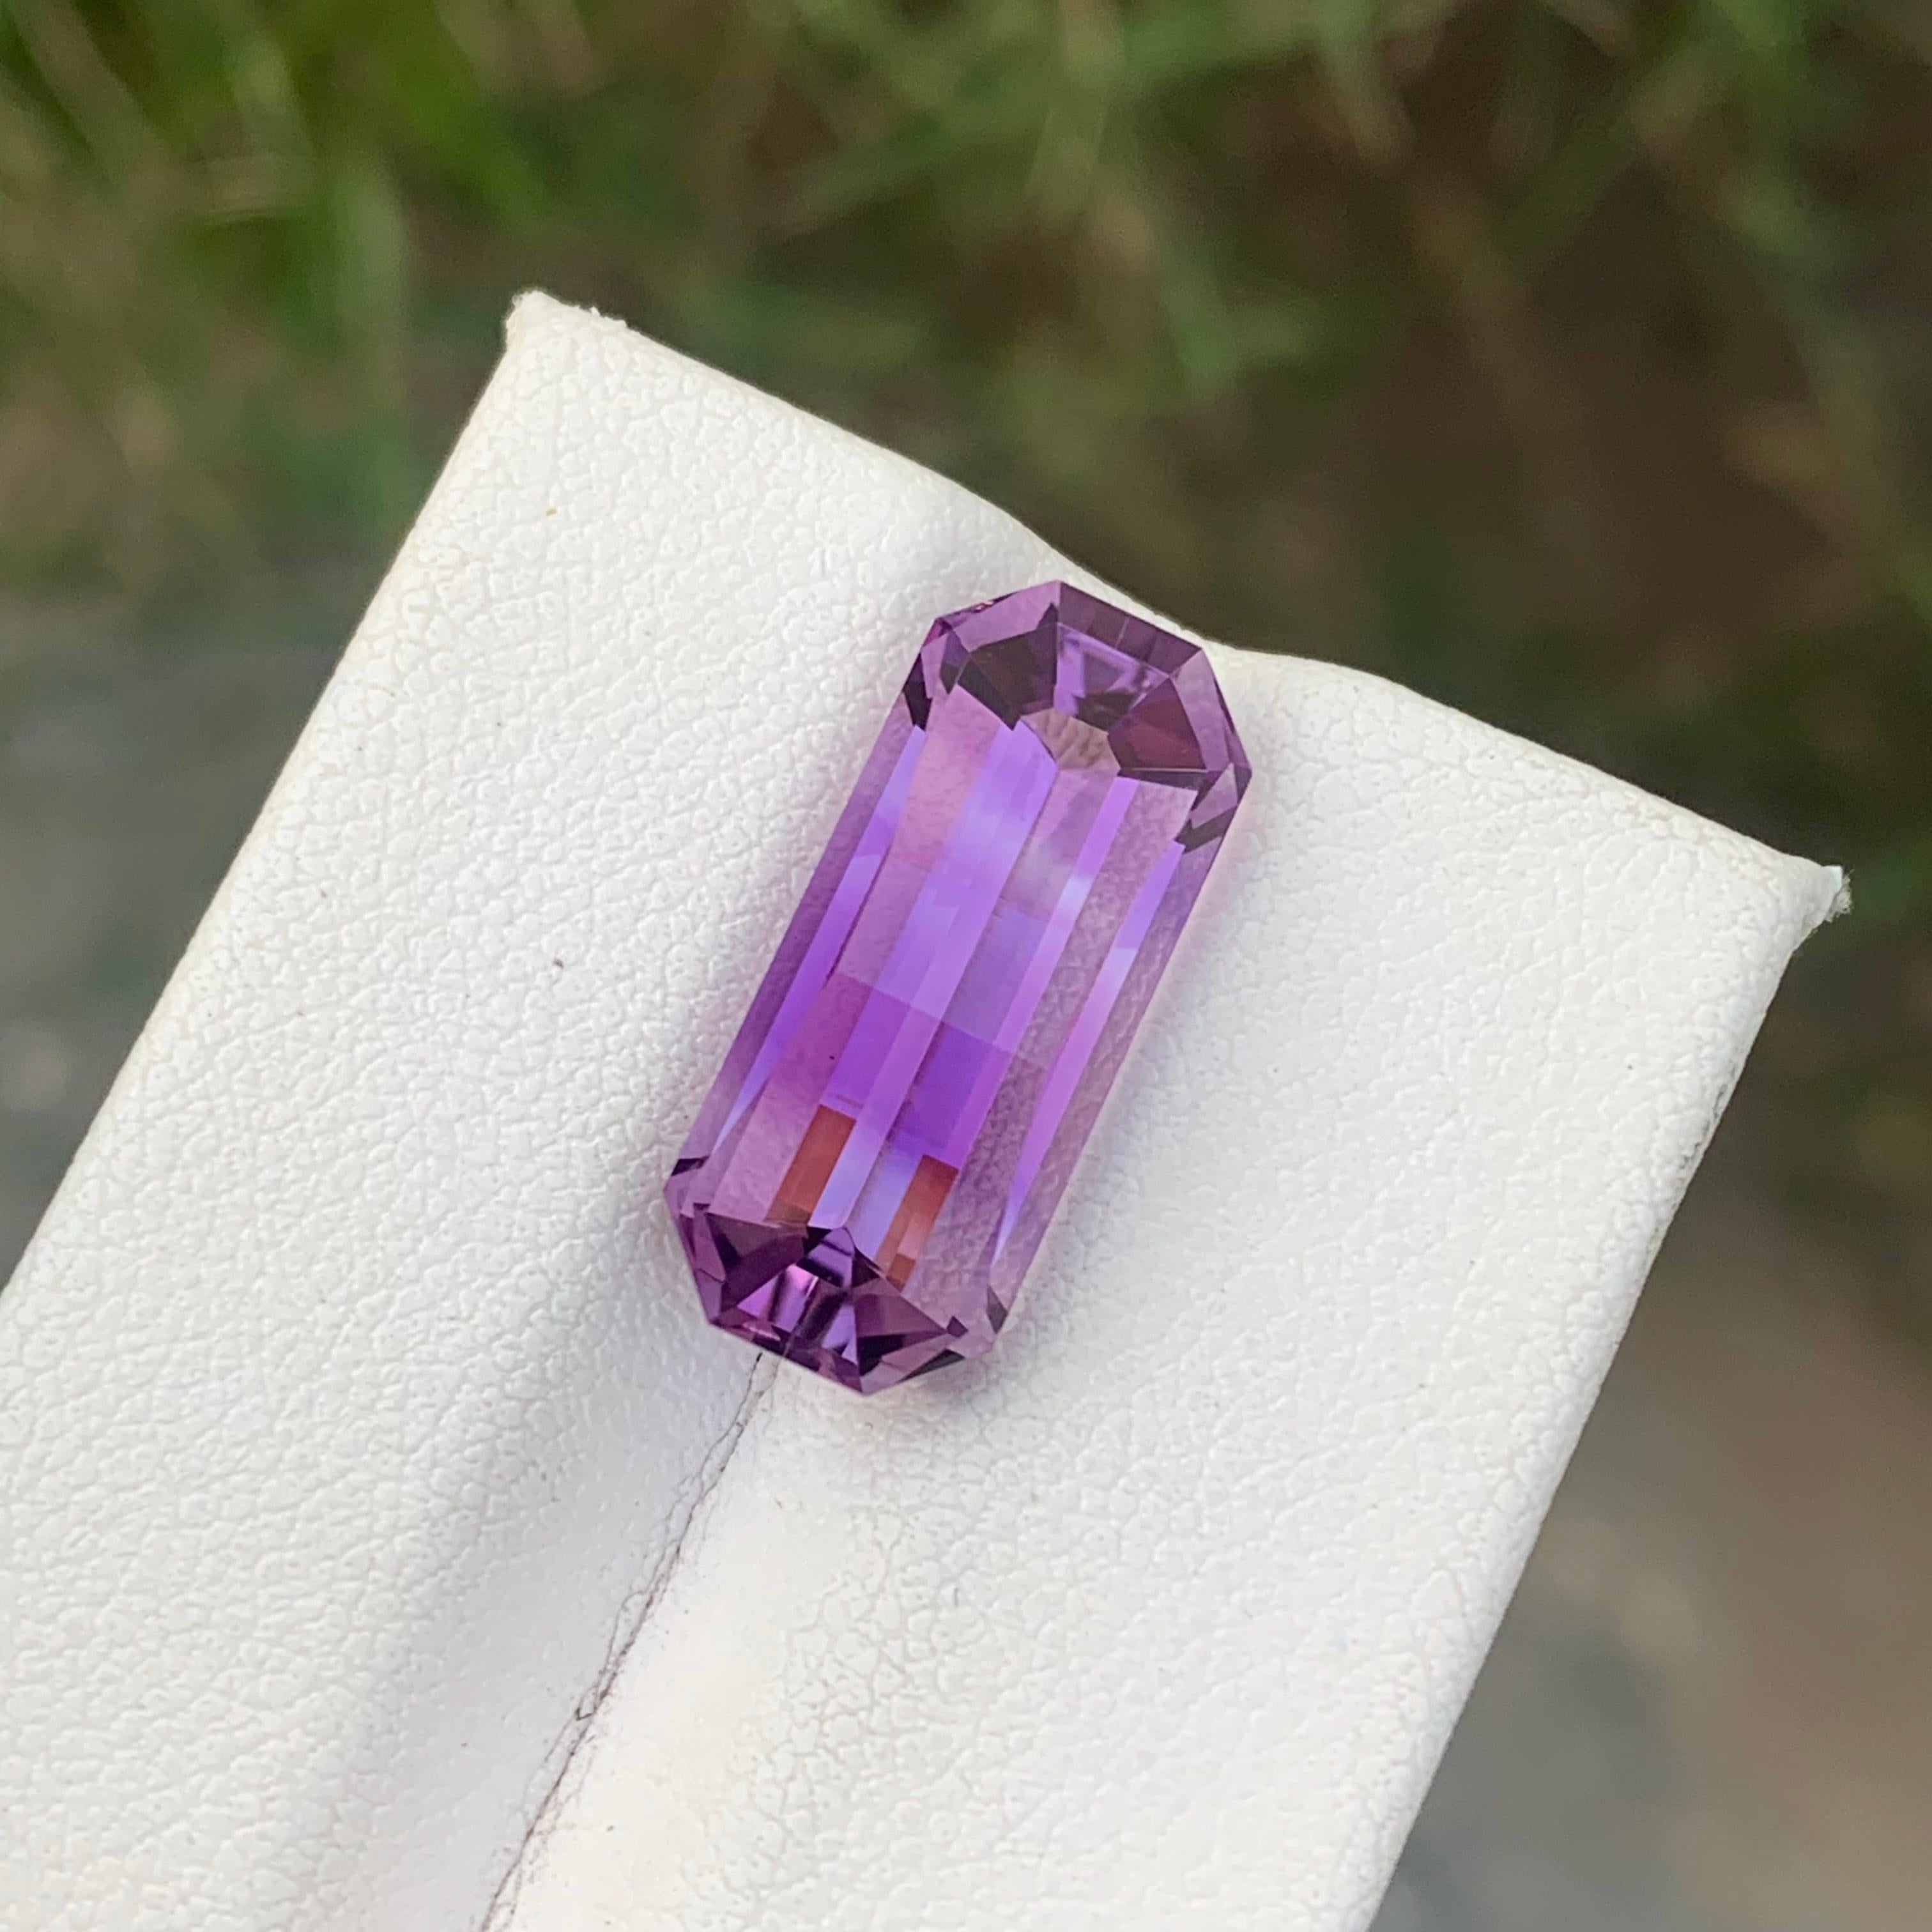 Arts and Crafts 8.25cts Natural Loose Amethyst Gemstone Pixel Pixelated Cut From Brazil Mine For Sale